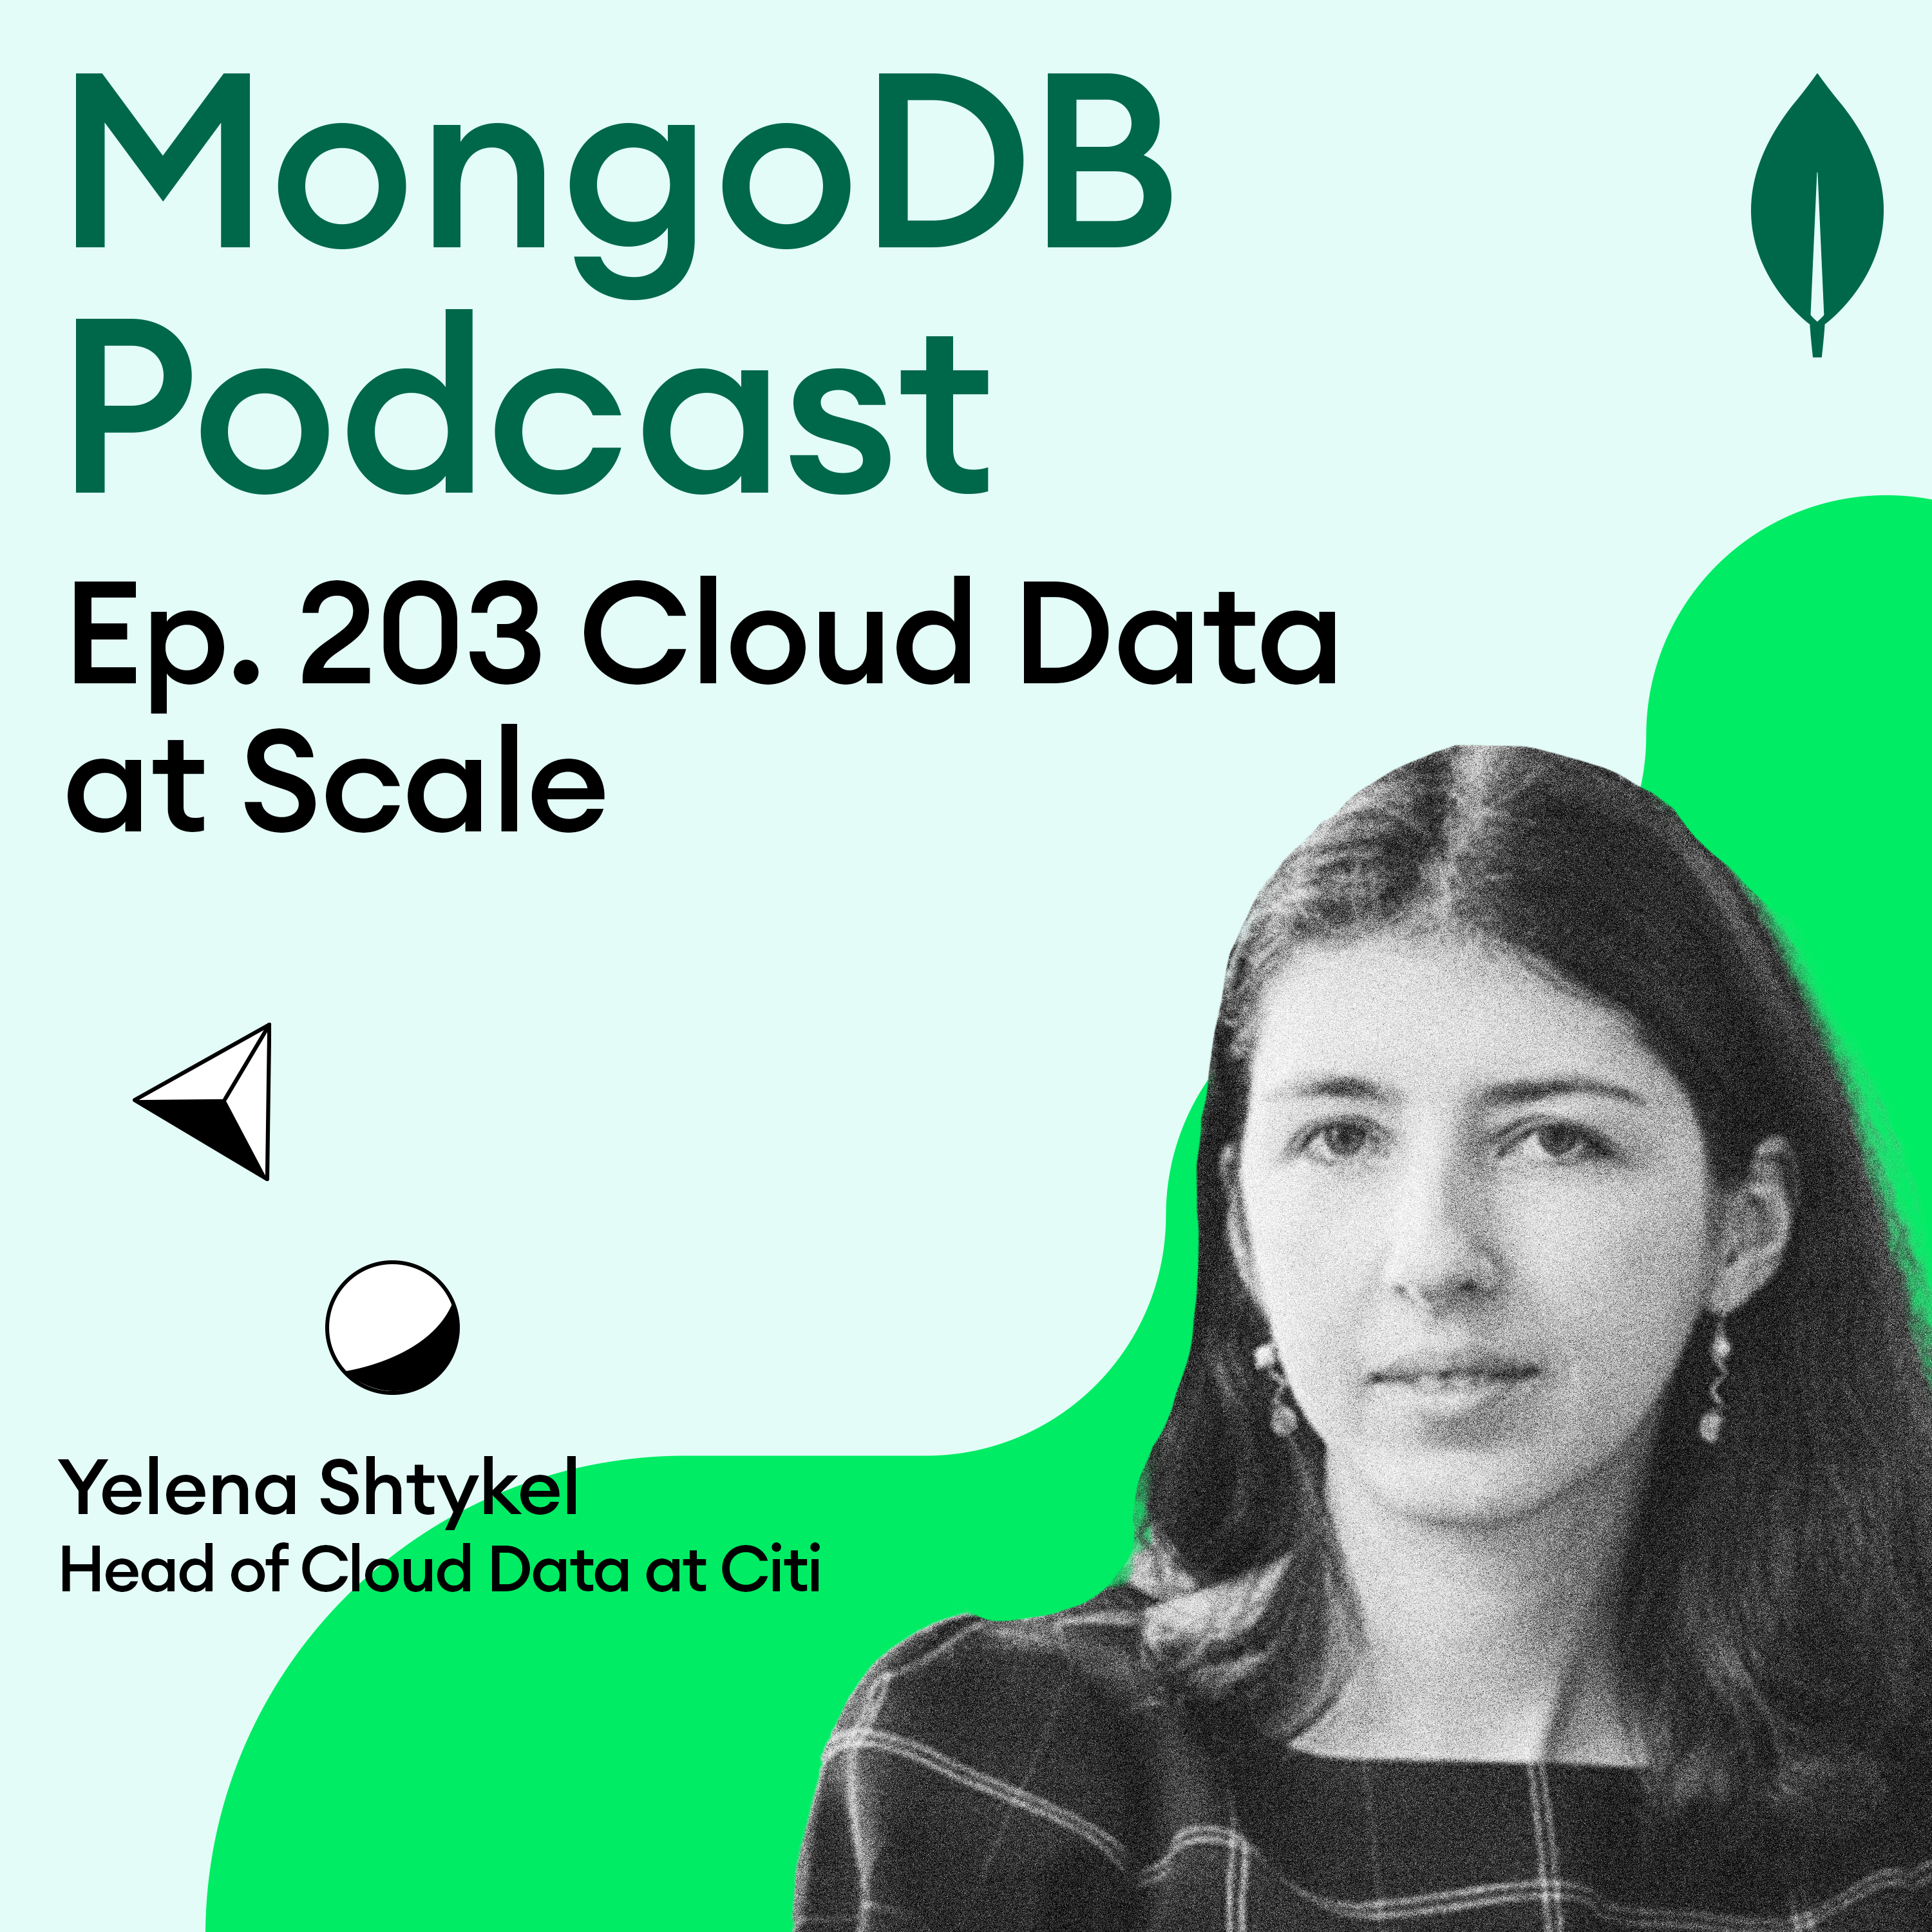 Ep. 203 Cloud Data at Scale: Yelena Shtykel on Data Management at Citi